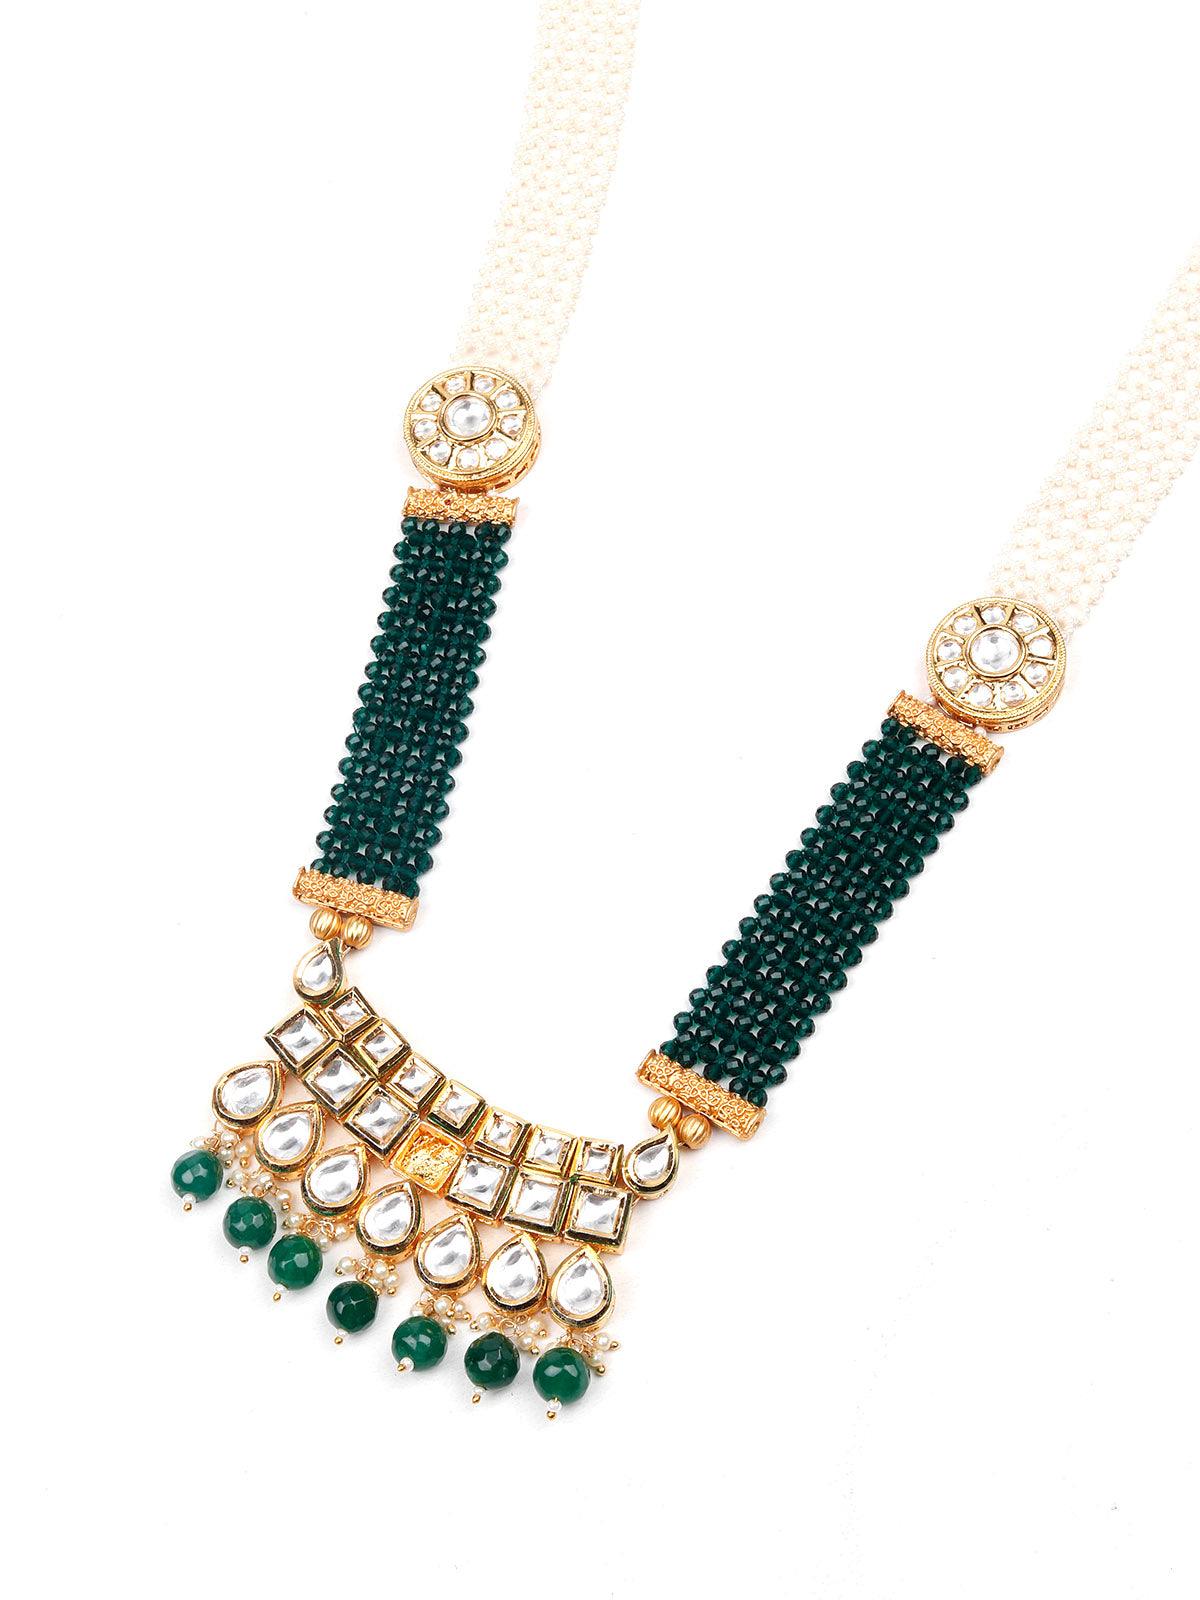 Women's Stunning Green And A White Beaded Statement Necklace - Odette